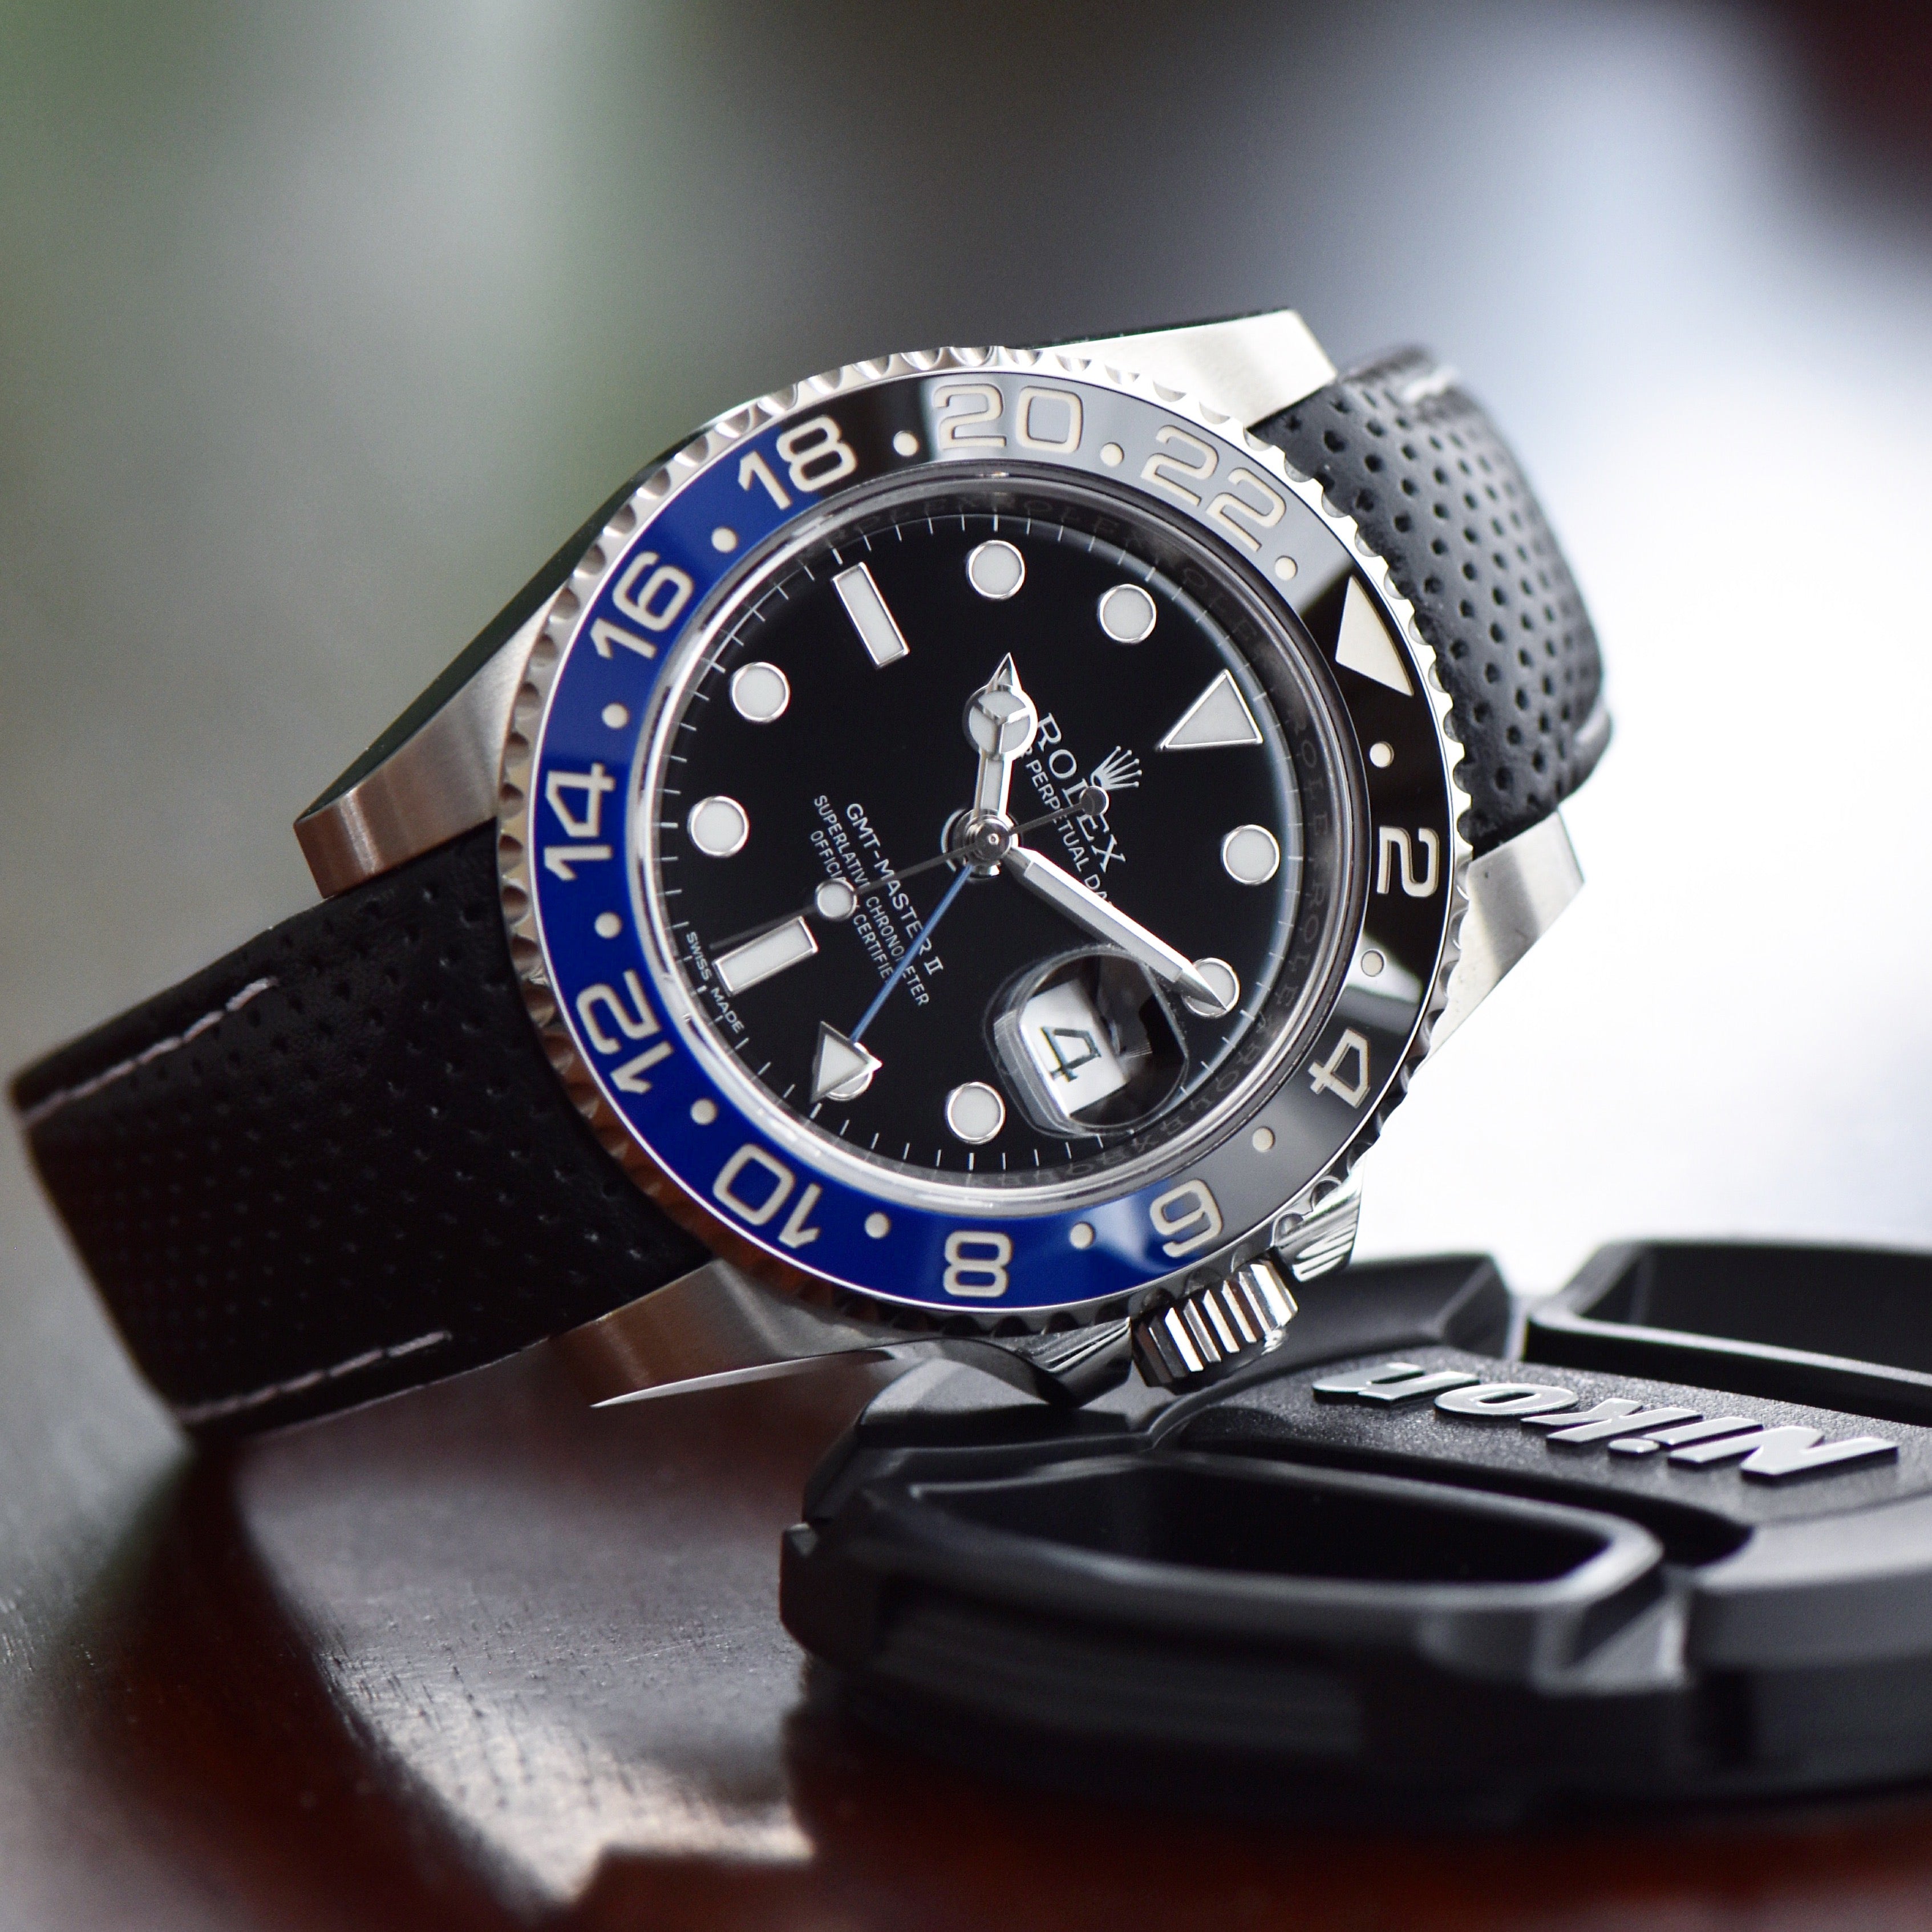 rolex gmt watch with bi-color blue and black bezel with a perforated leather watch strap on it, resting on top of a car key fob